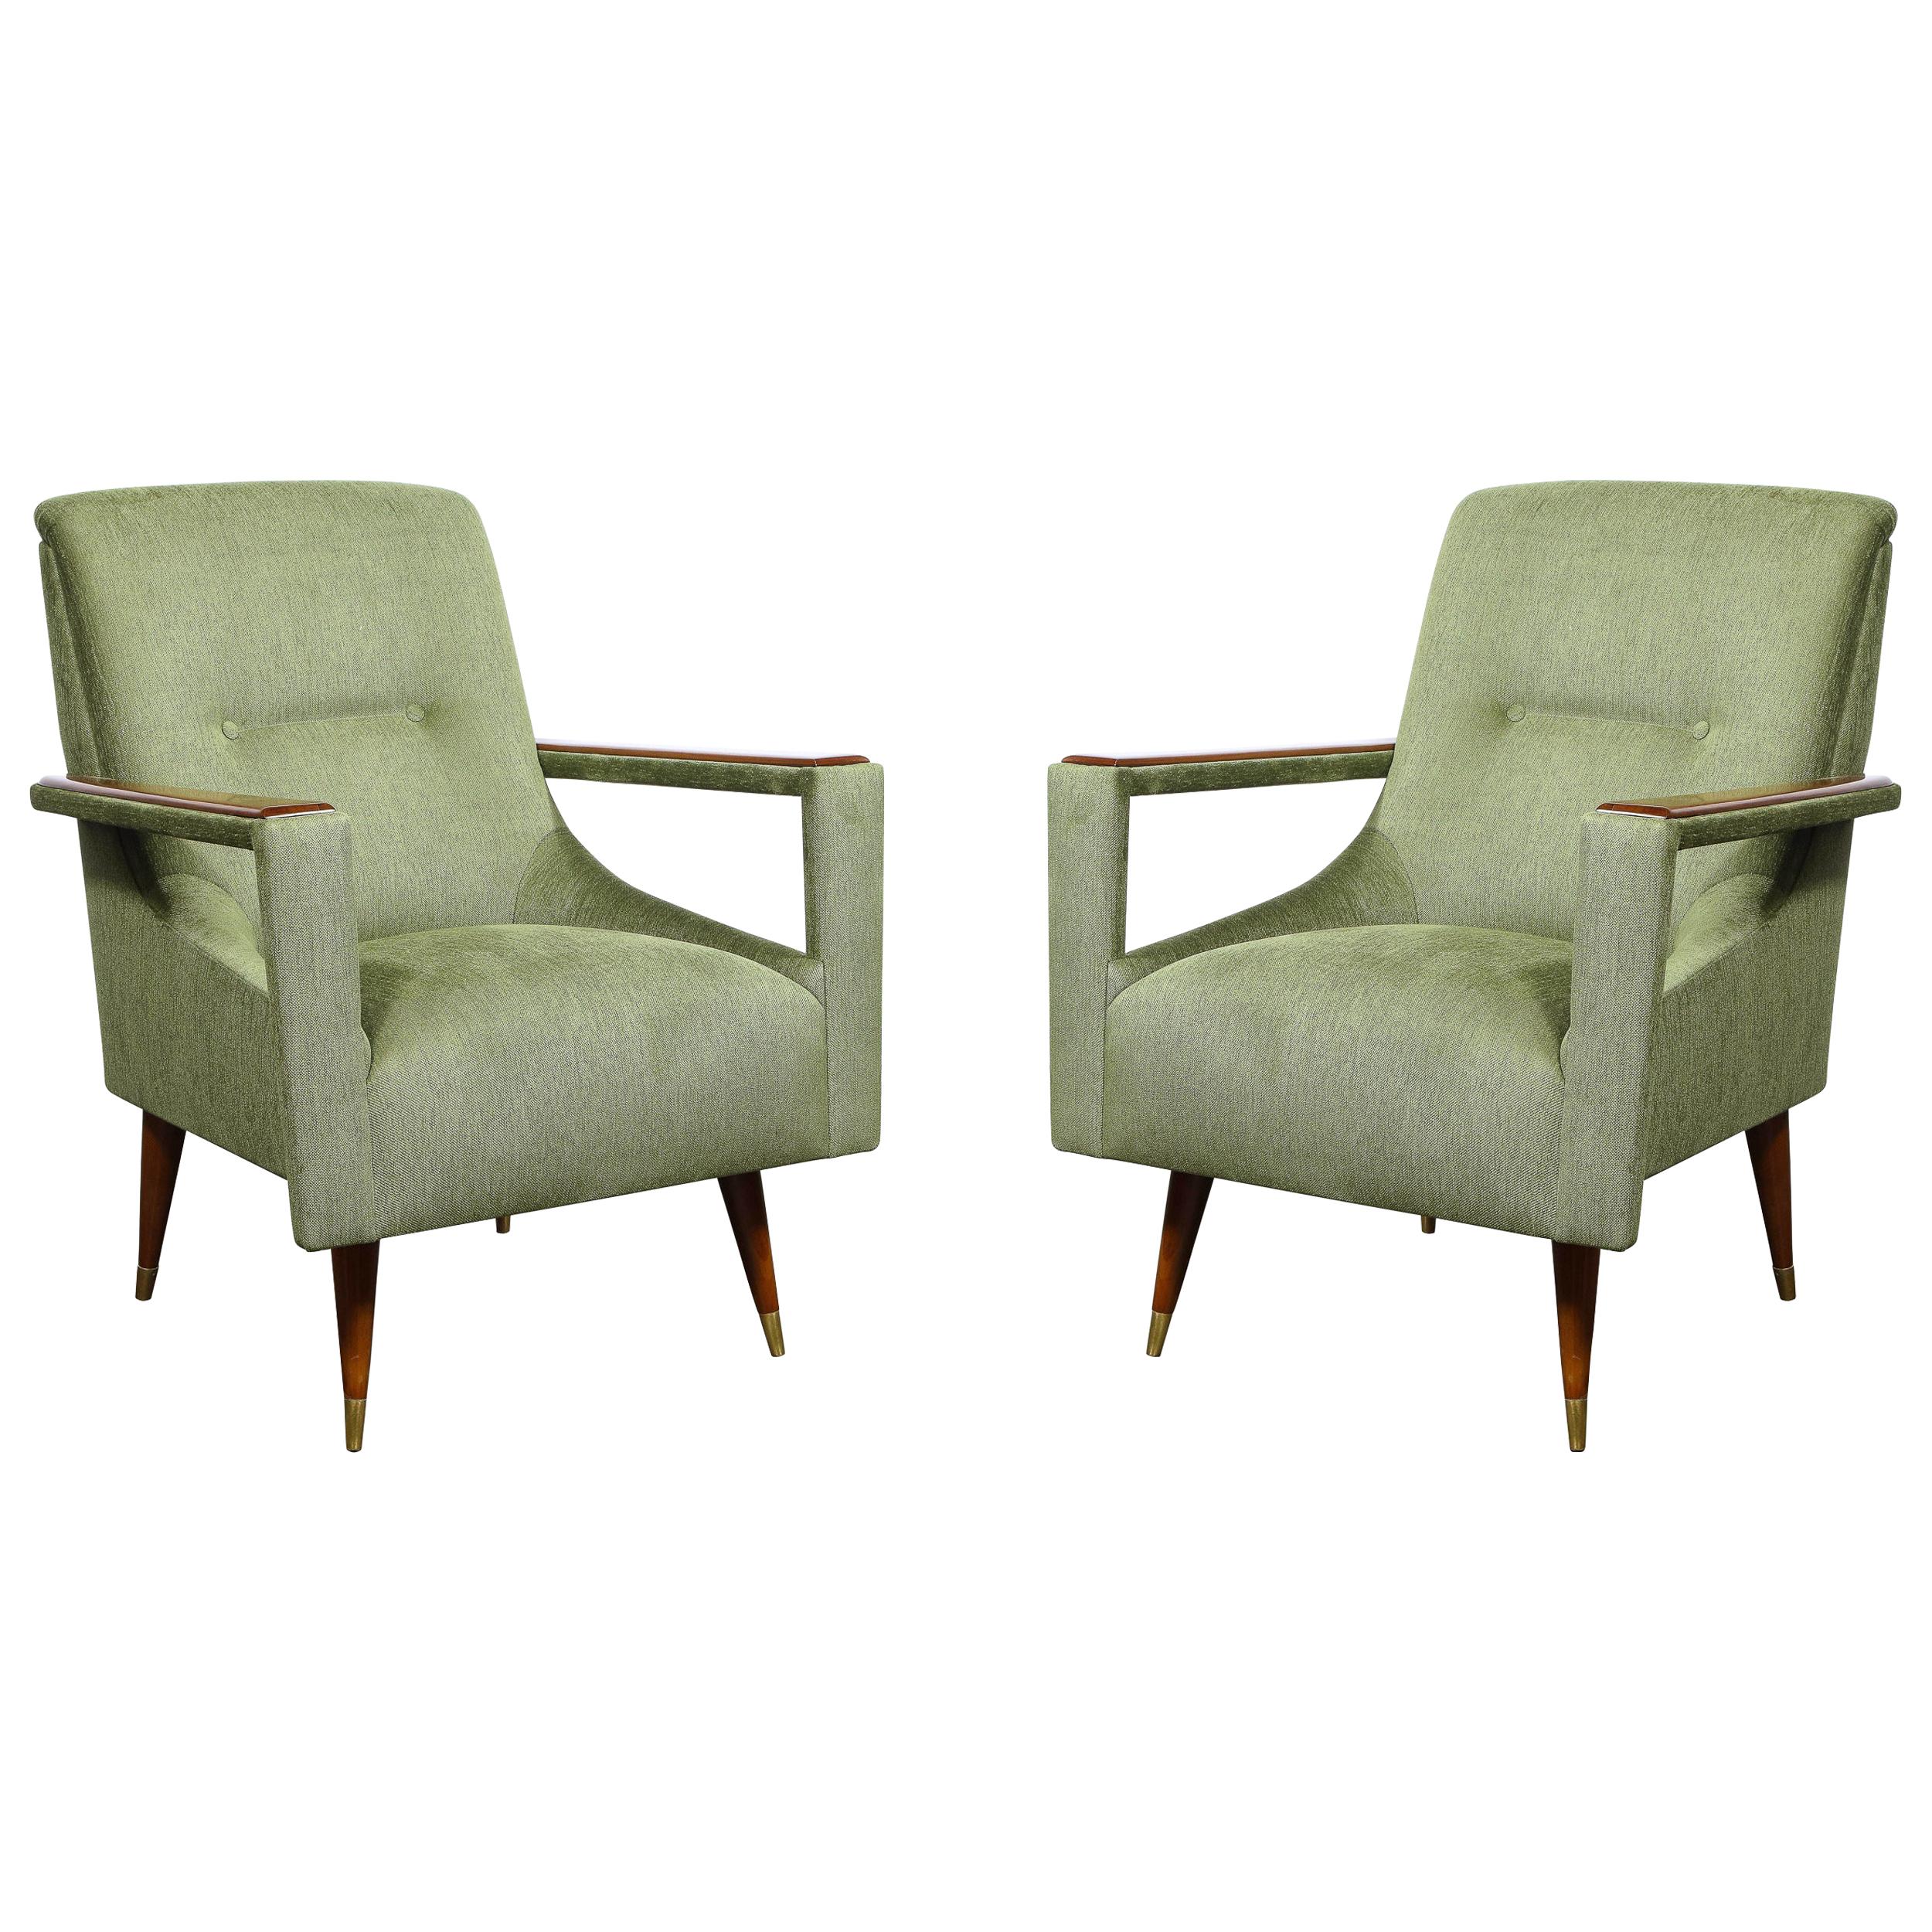 Pair of Mid-Century Modern Walnut & Moss Green Upholstery Arm Cutout Chairs